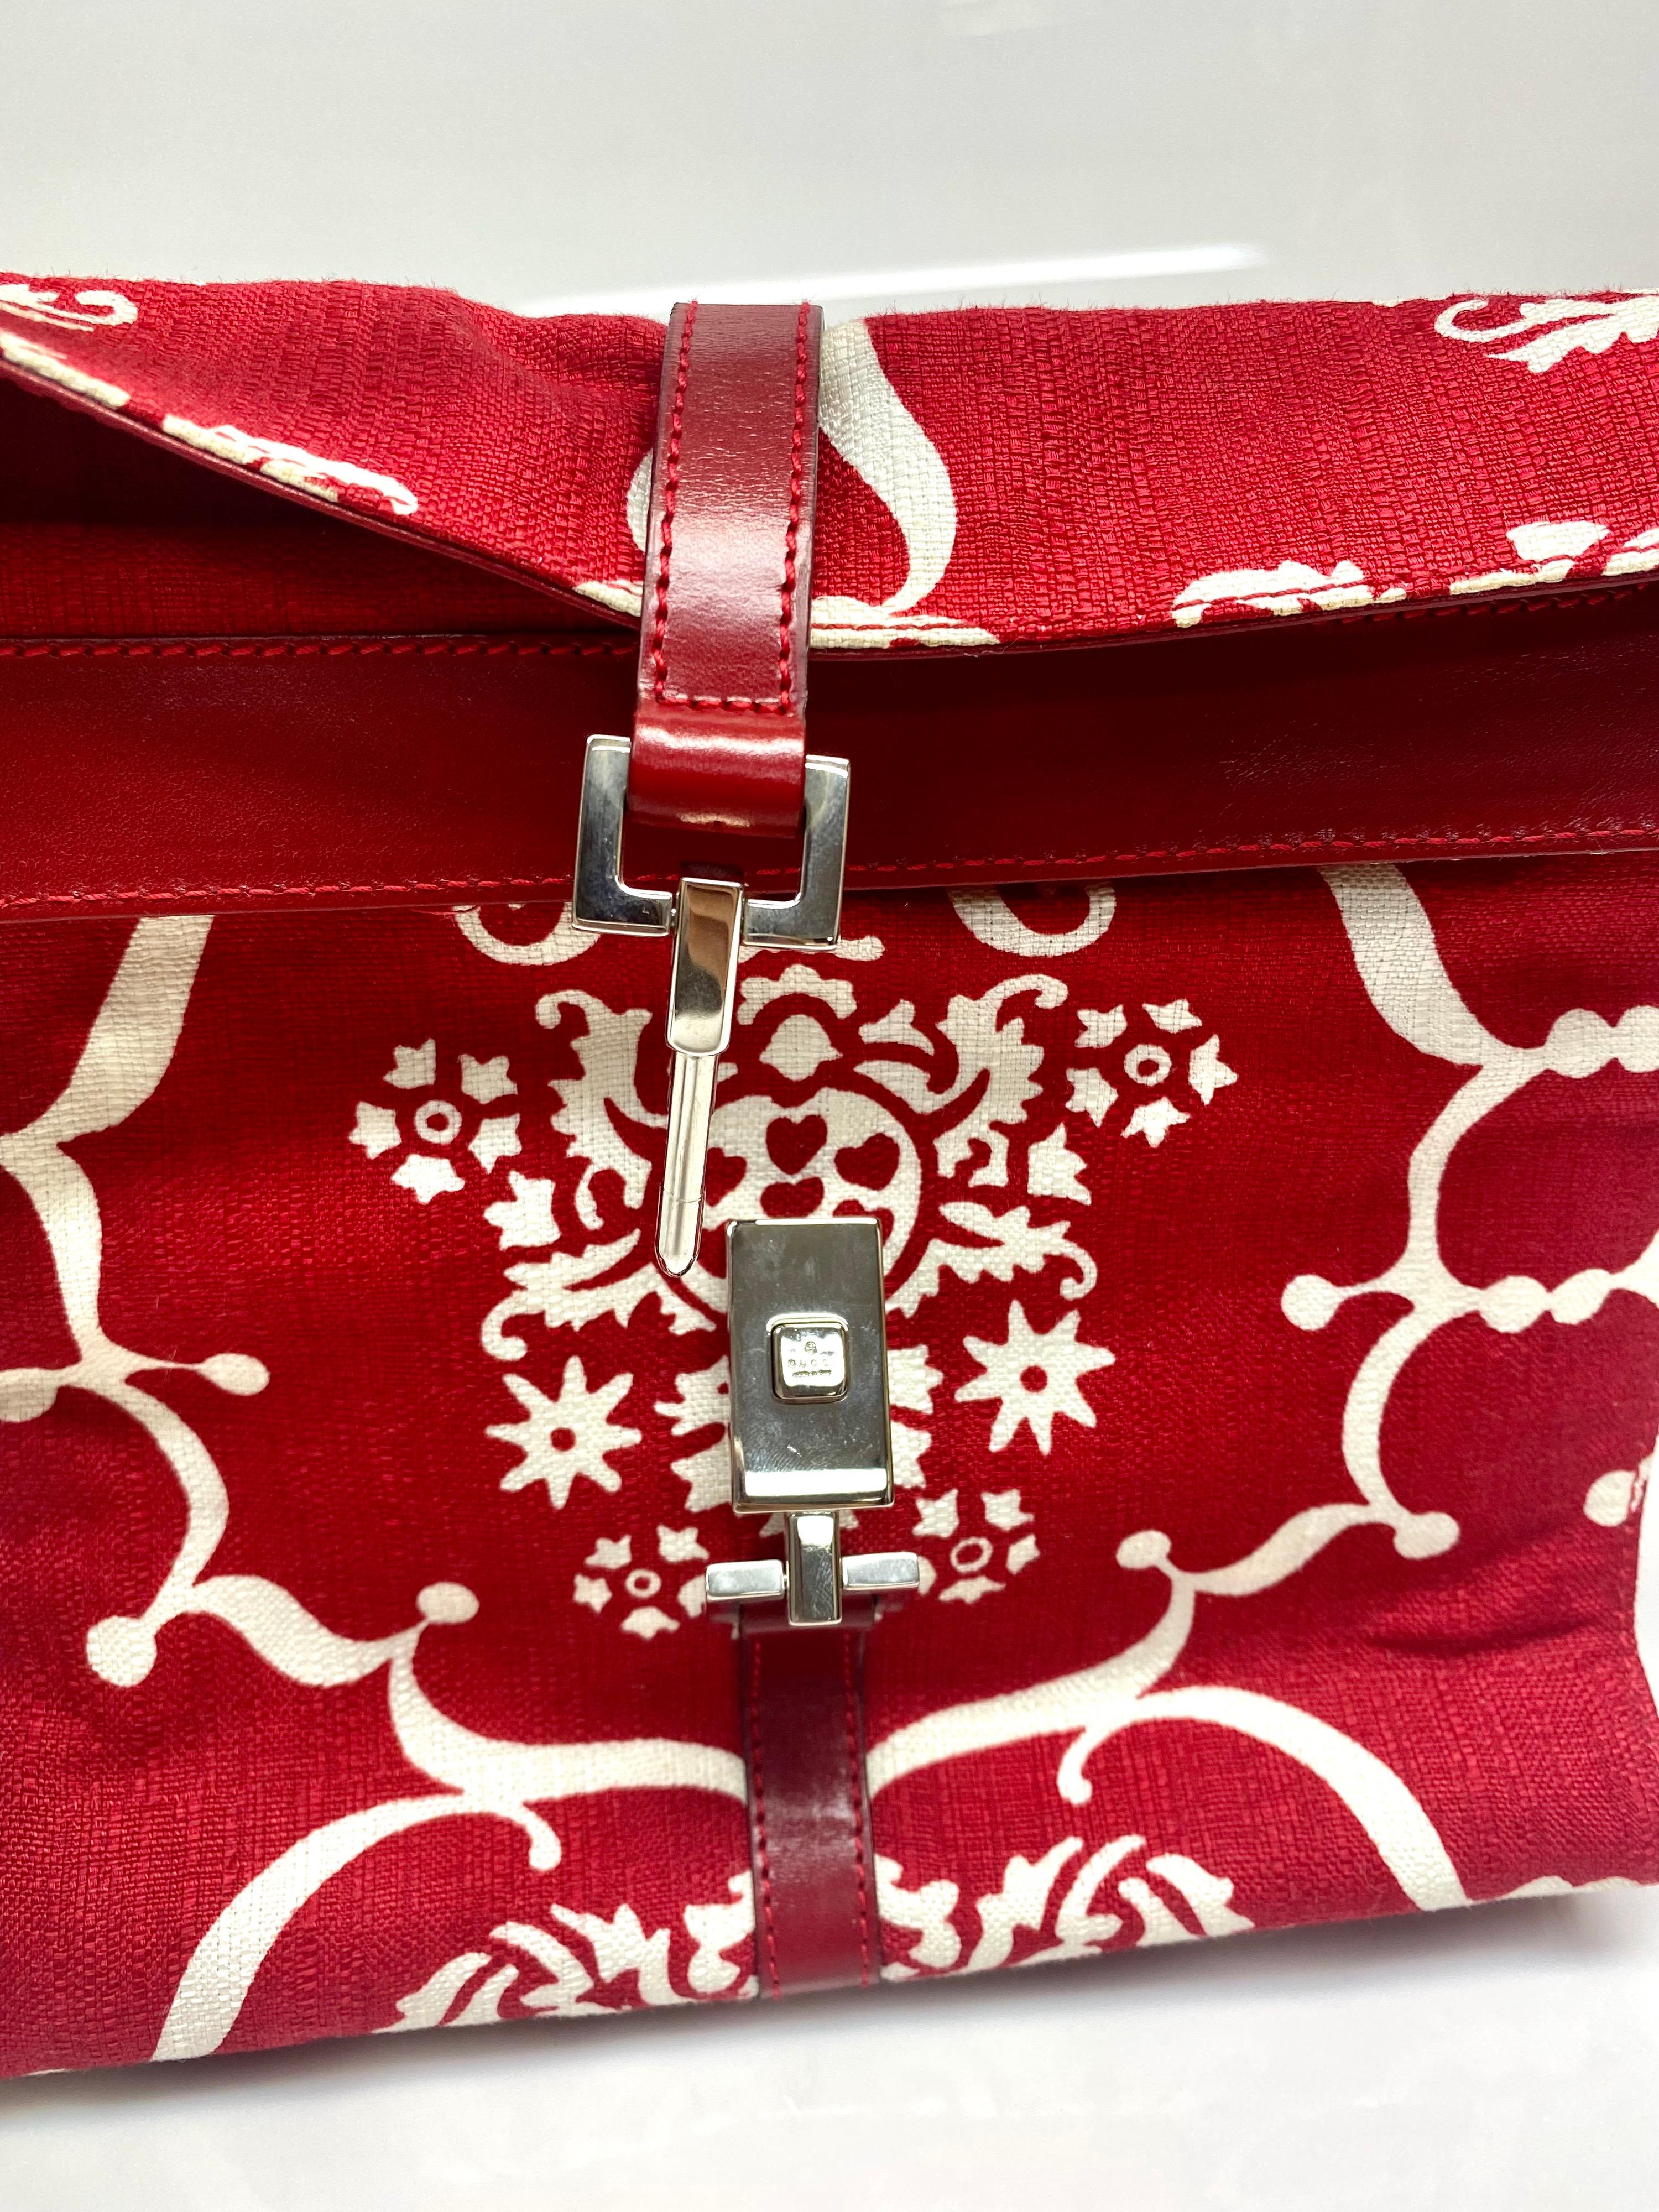 Gucci Fabric Printed Leather Red and White Bag 6